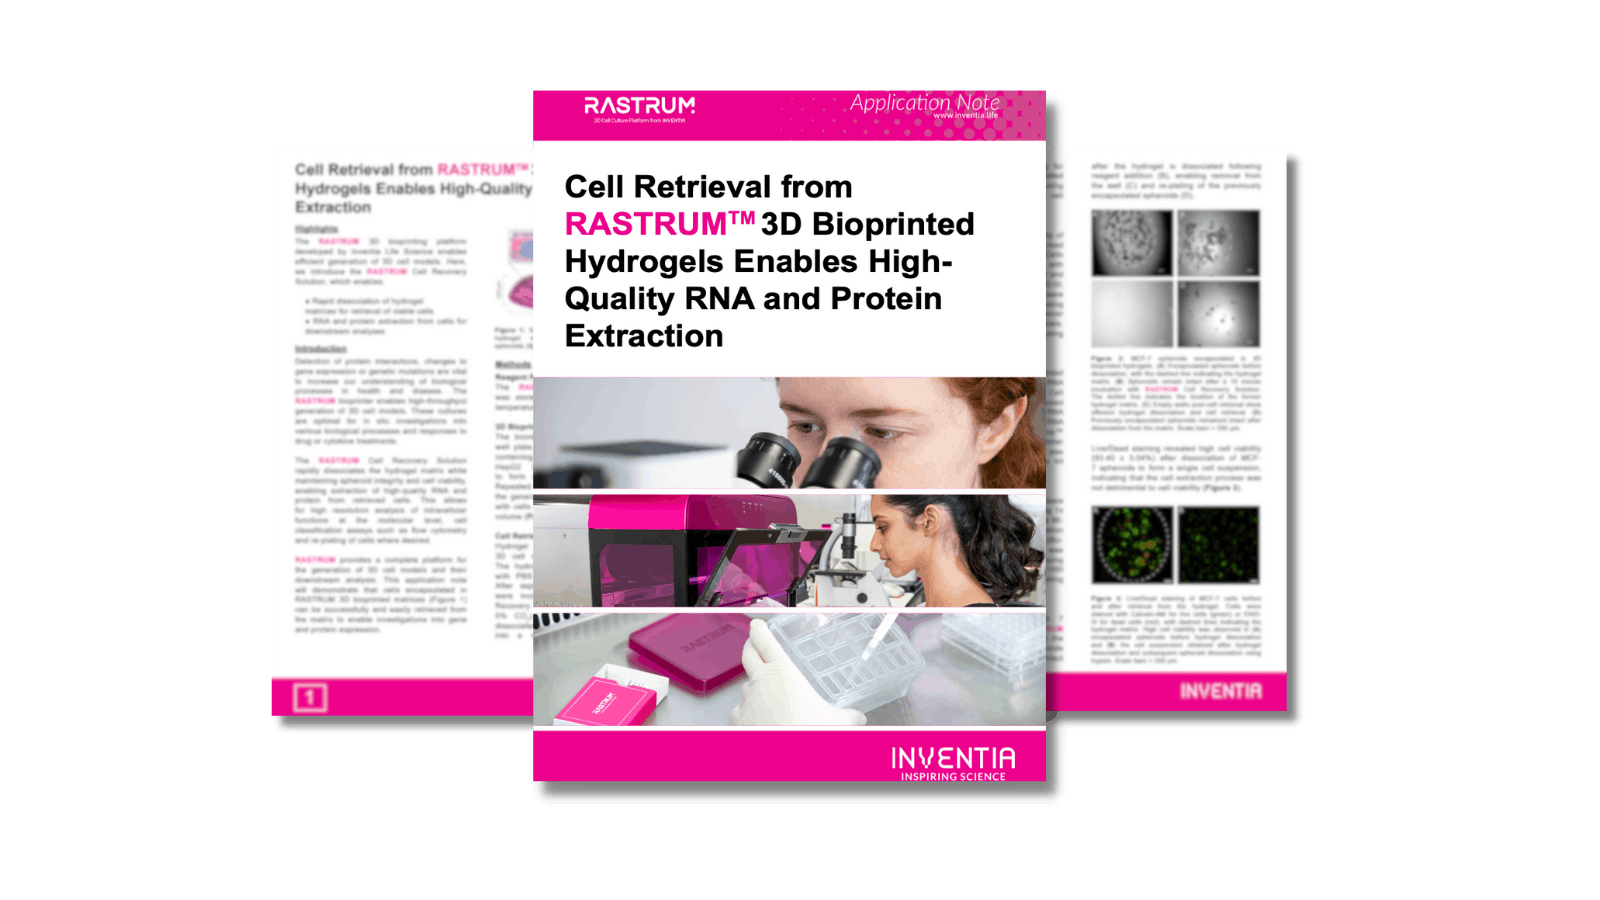 Cell retrieval from RASTRUM™ 3D bioprinted hydrogels enables high quality RNA and protein extraction